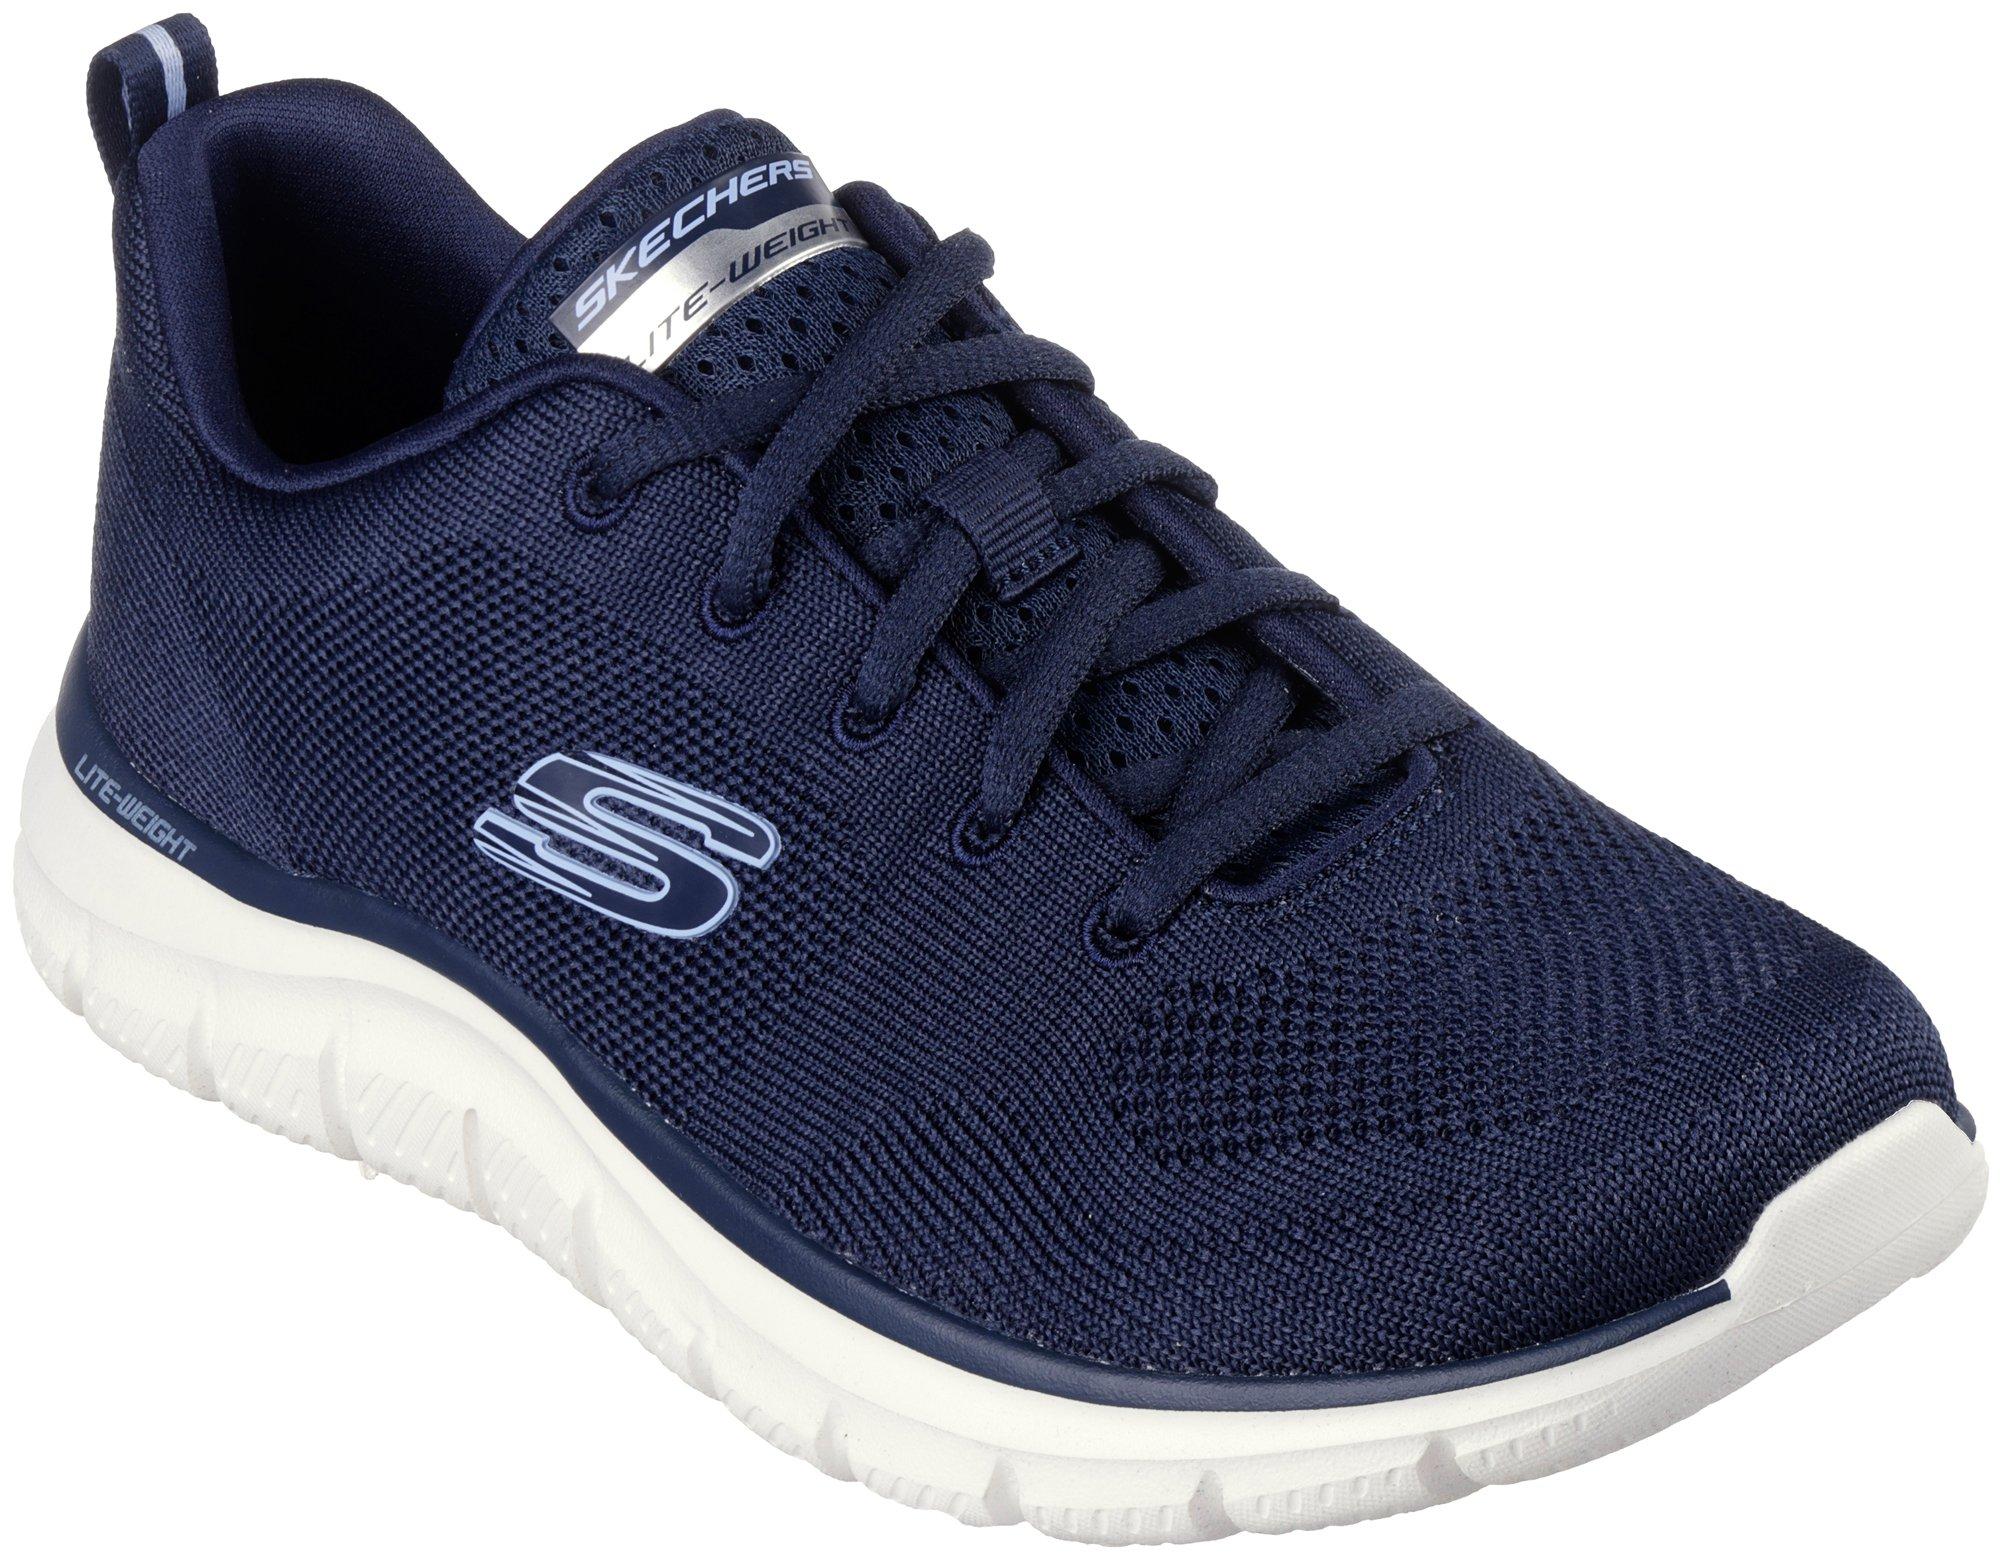 Womens Track Daytime Dreamer Walking Athletic Shoes